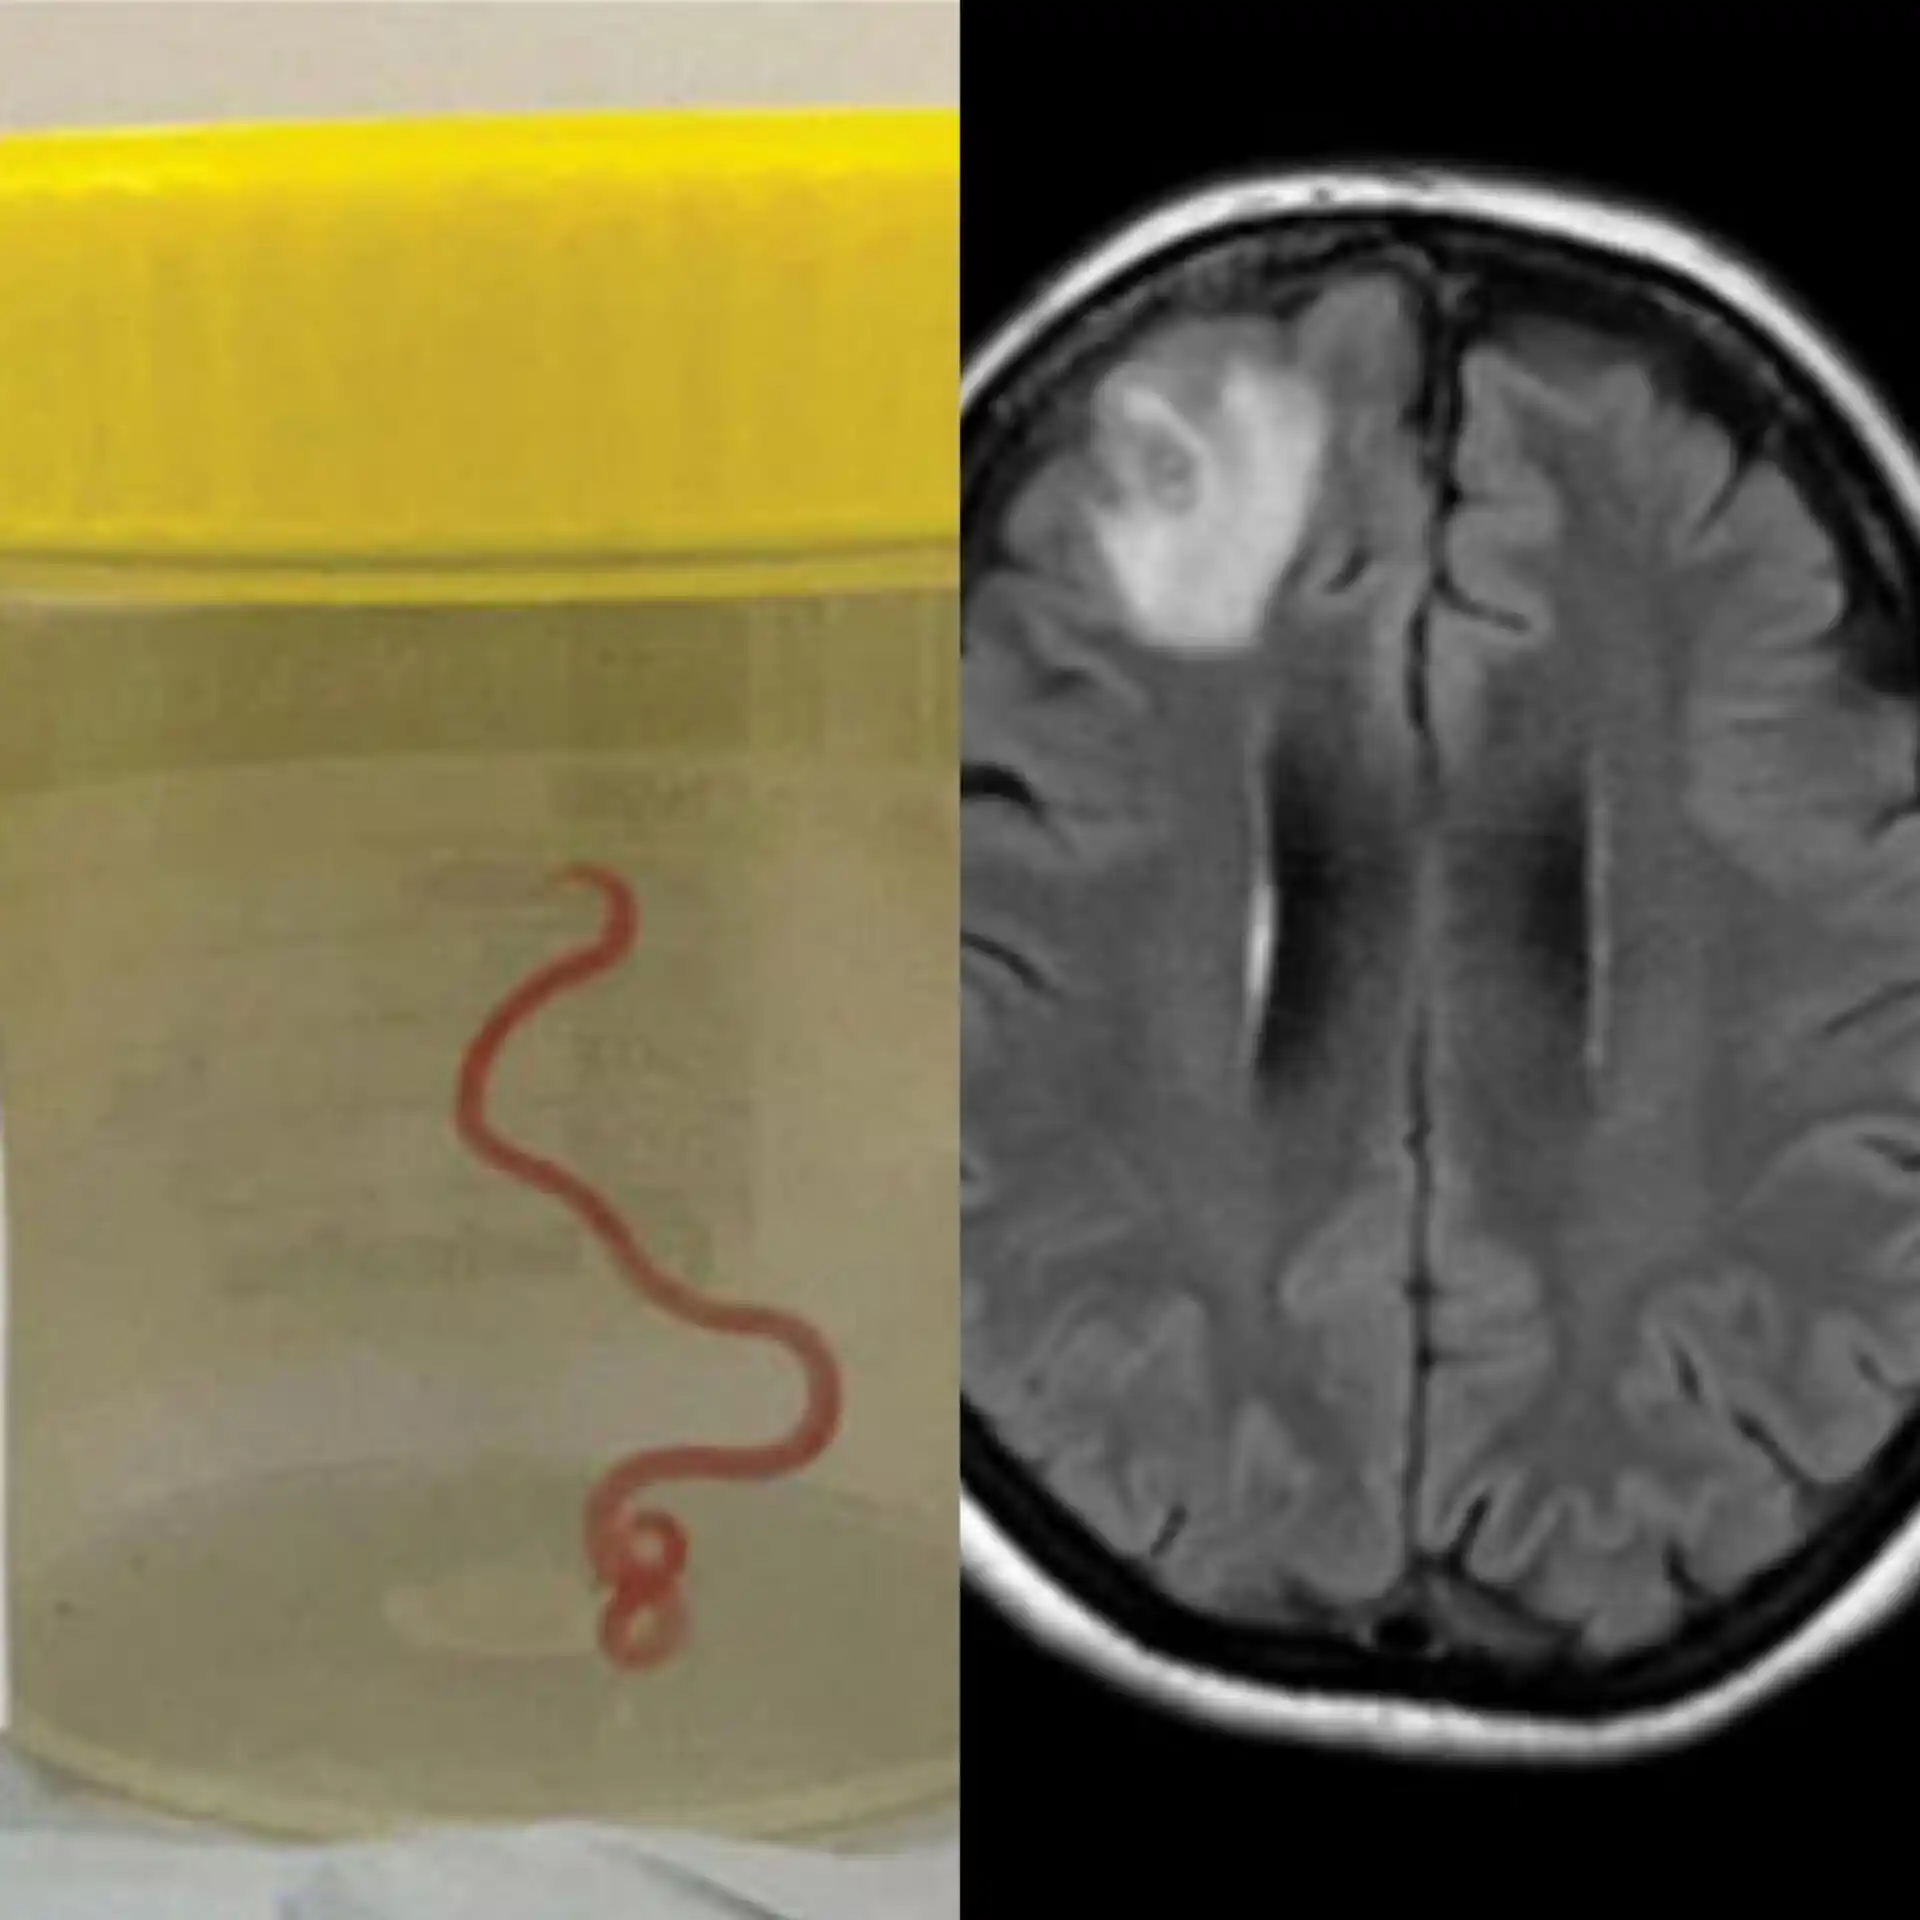 Surgeons find Worm living in woman’s brain in world’s first case after she complained for years of having migraine and pneumonia